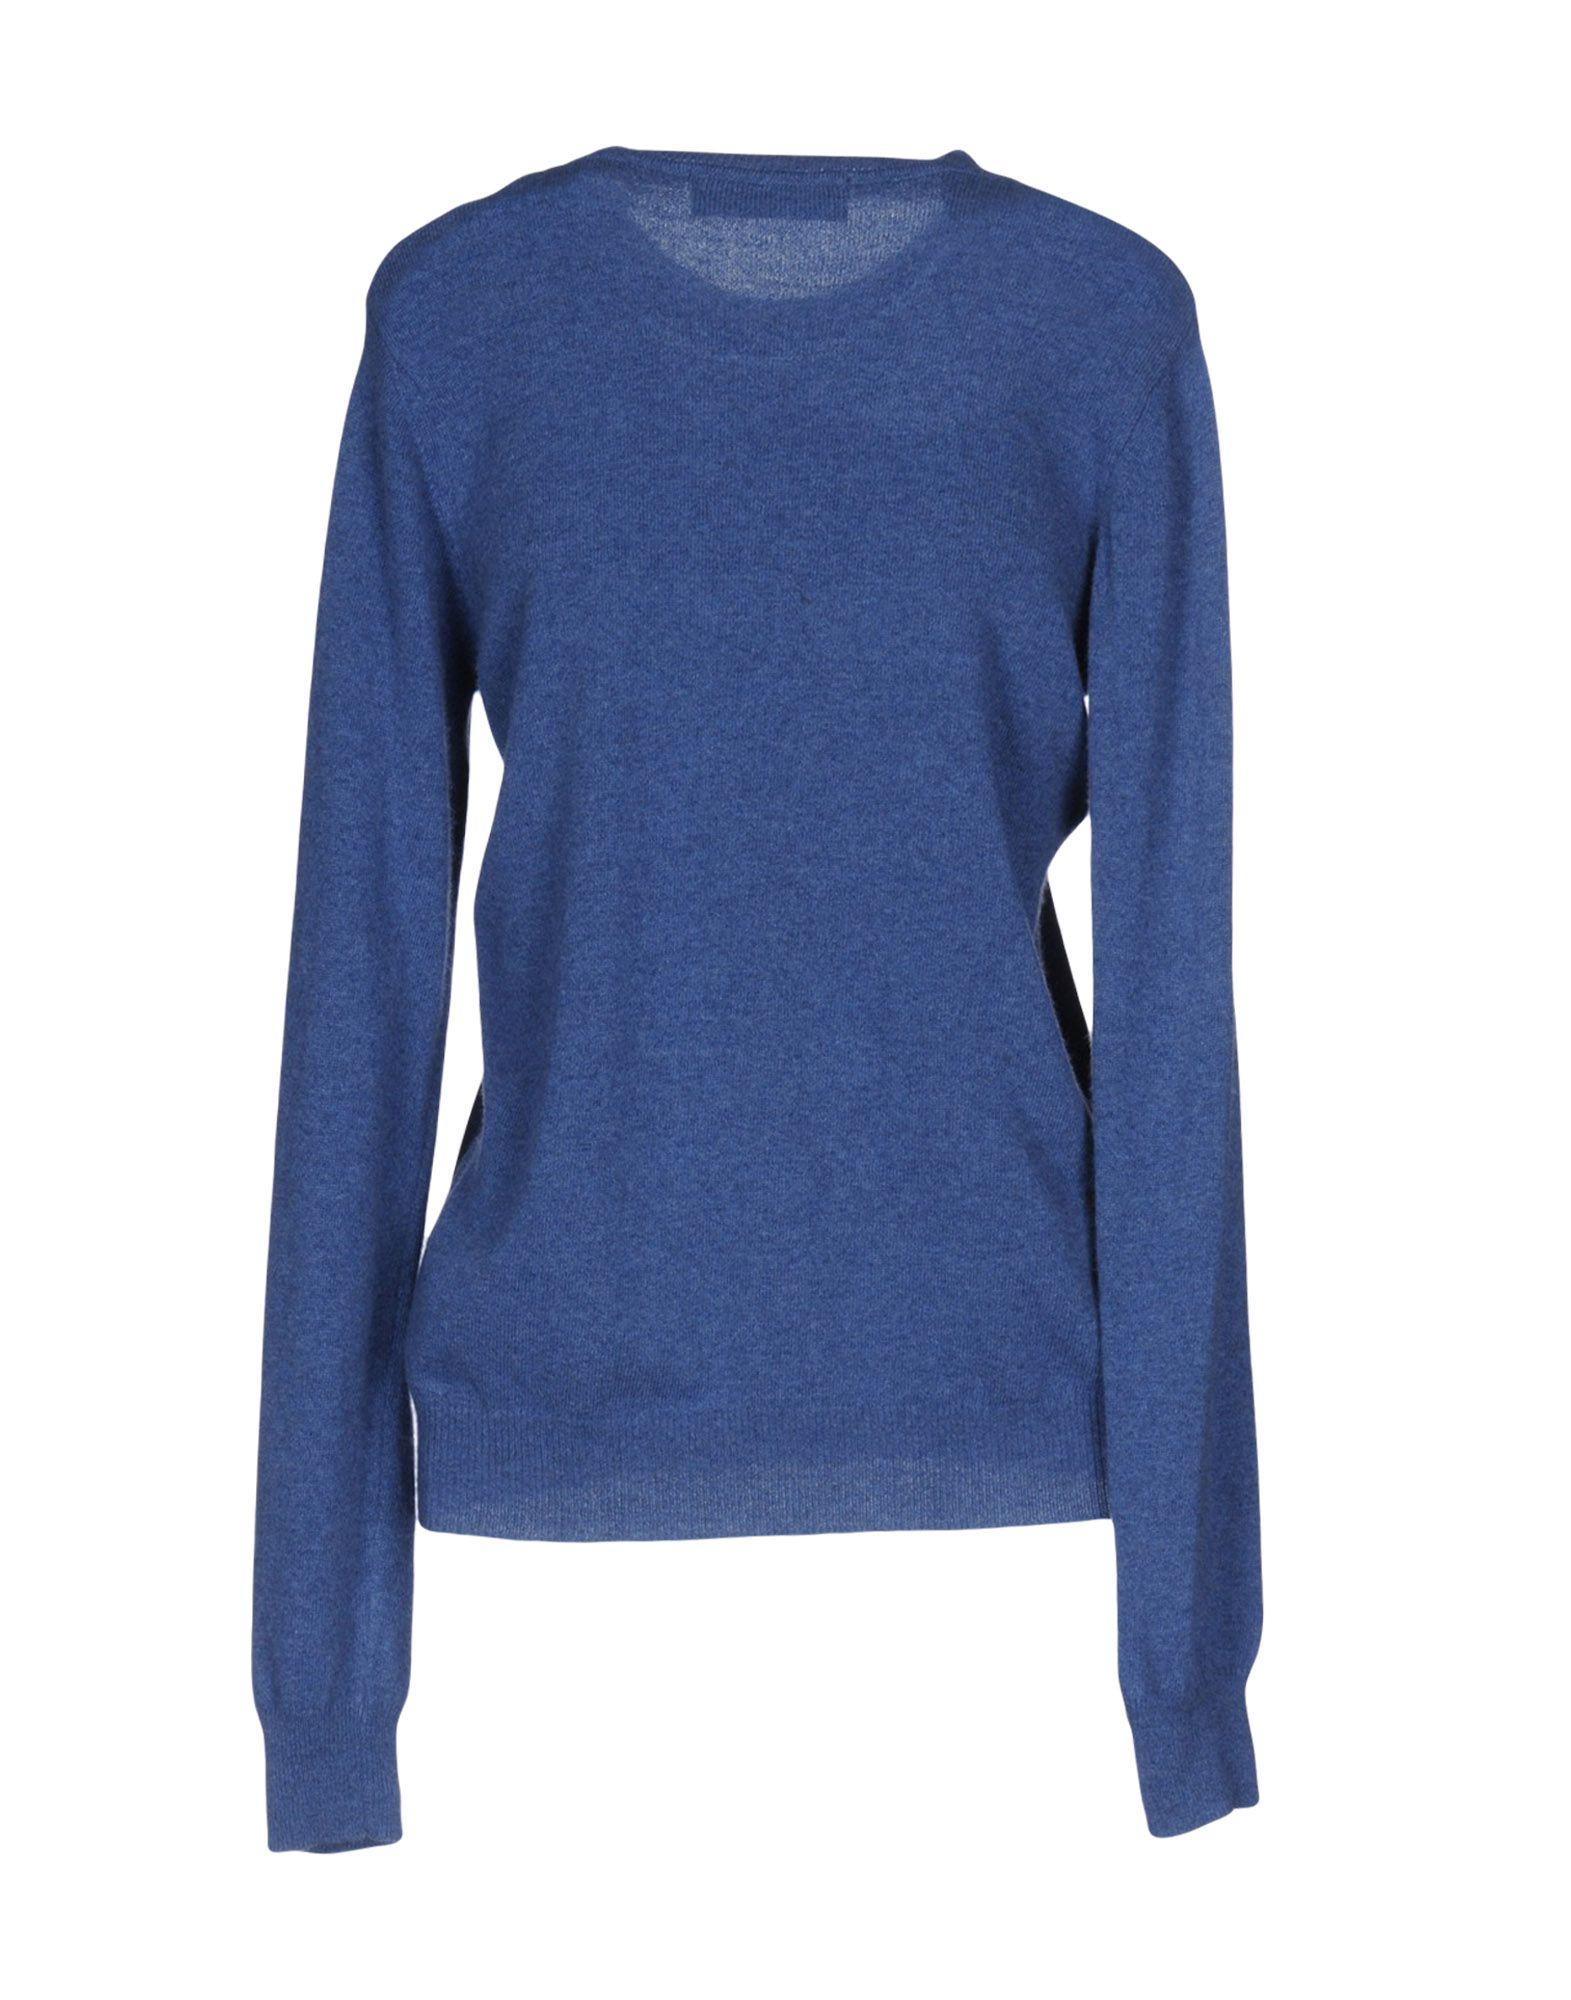 Lyst - Love Moschino Sweater in Blue